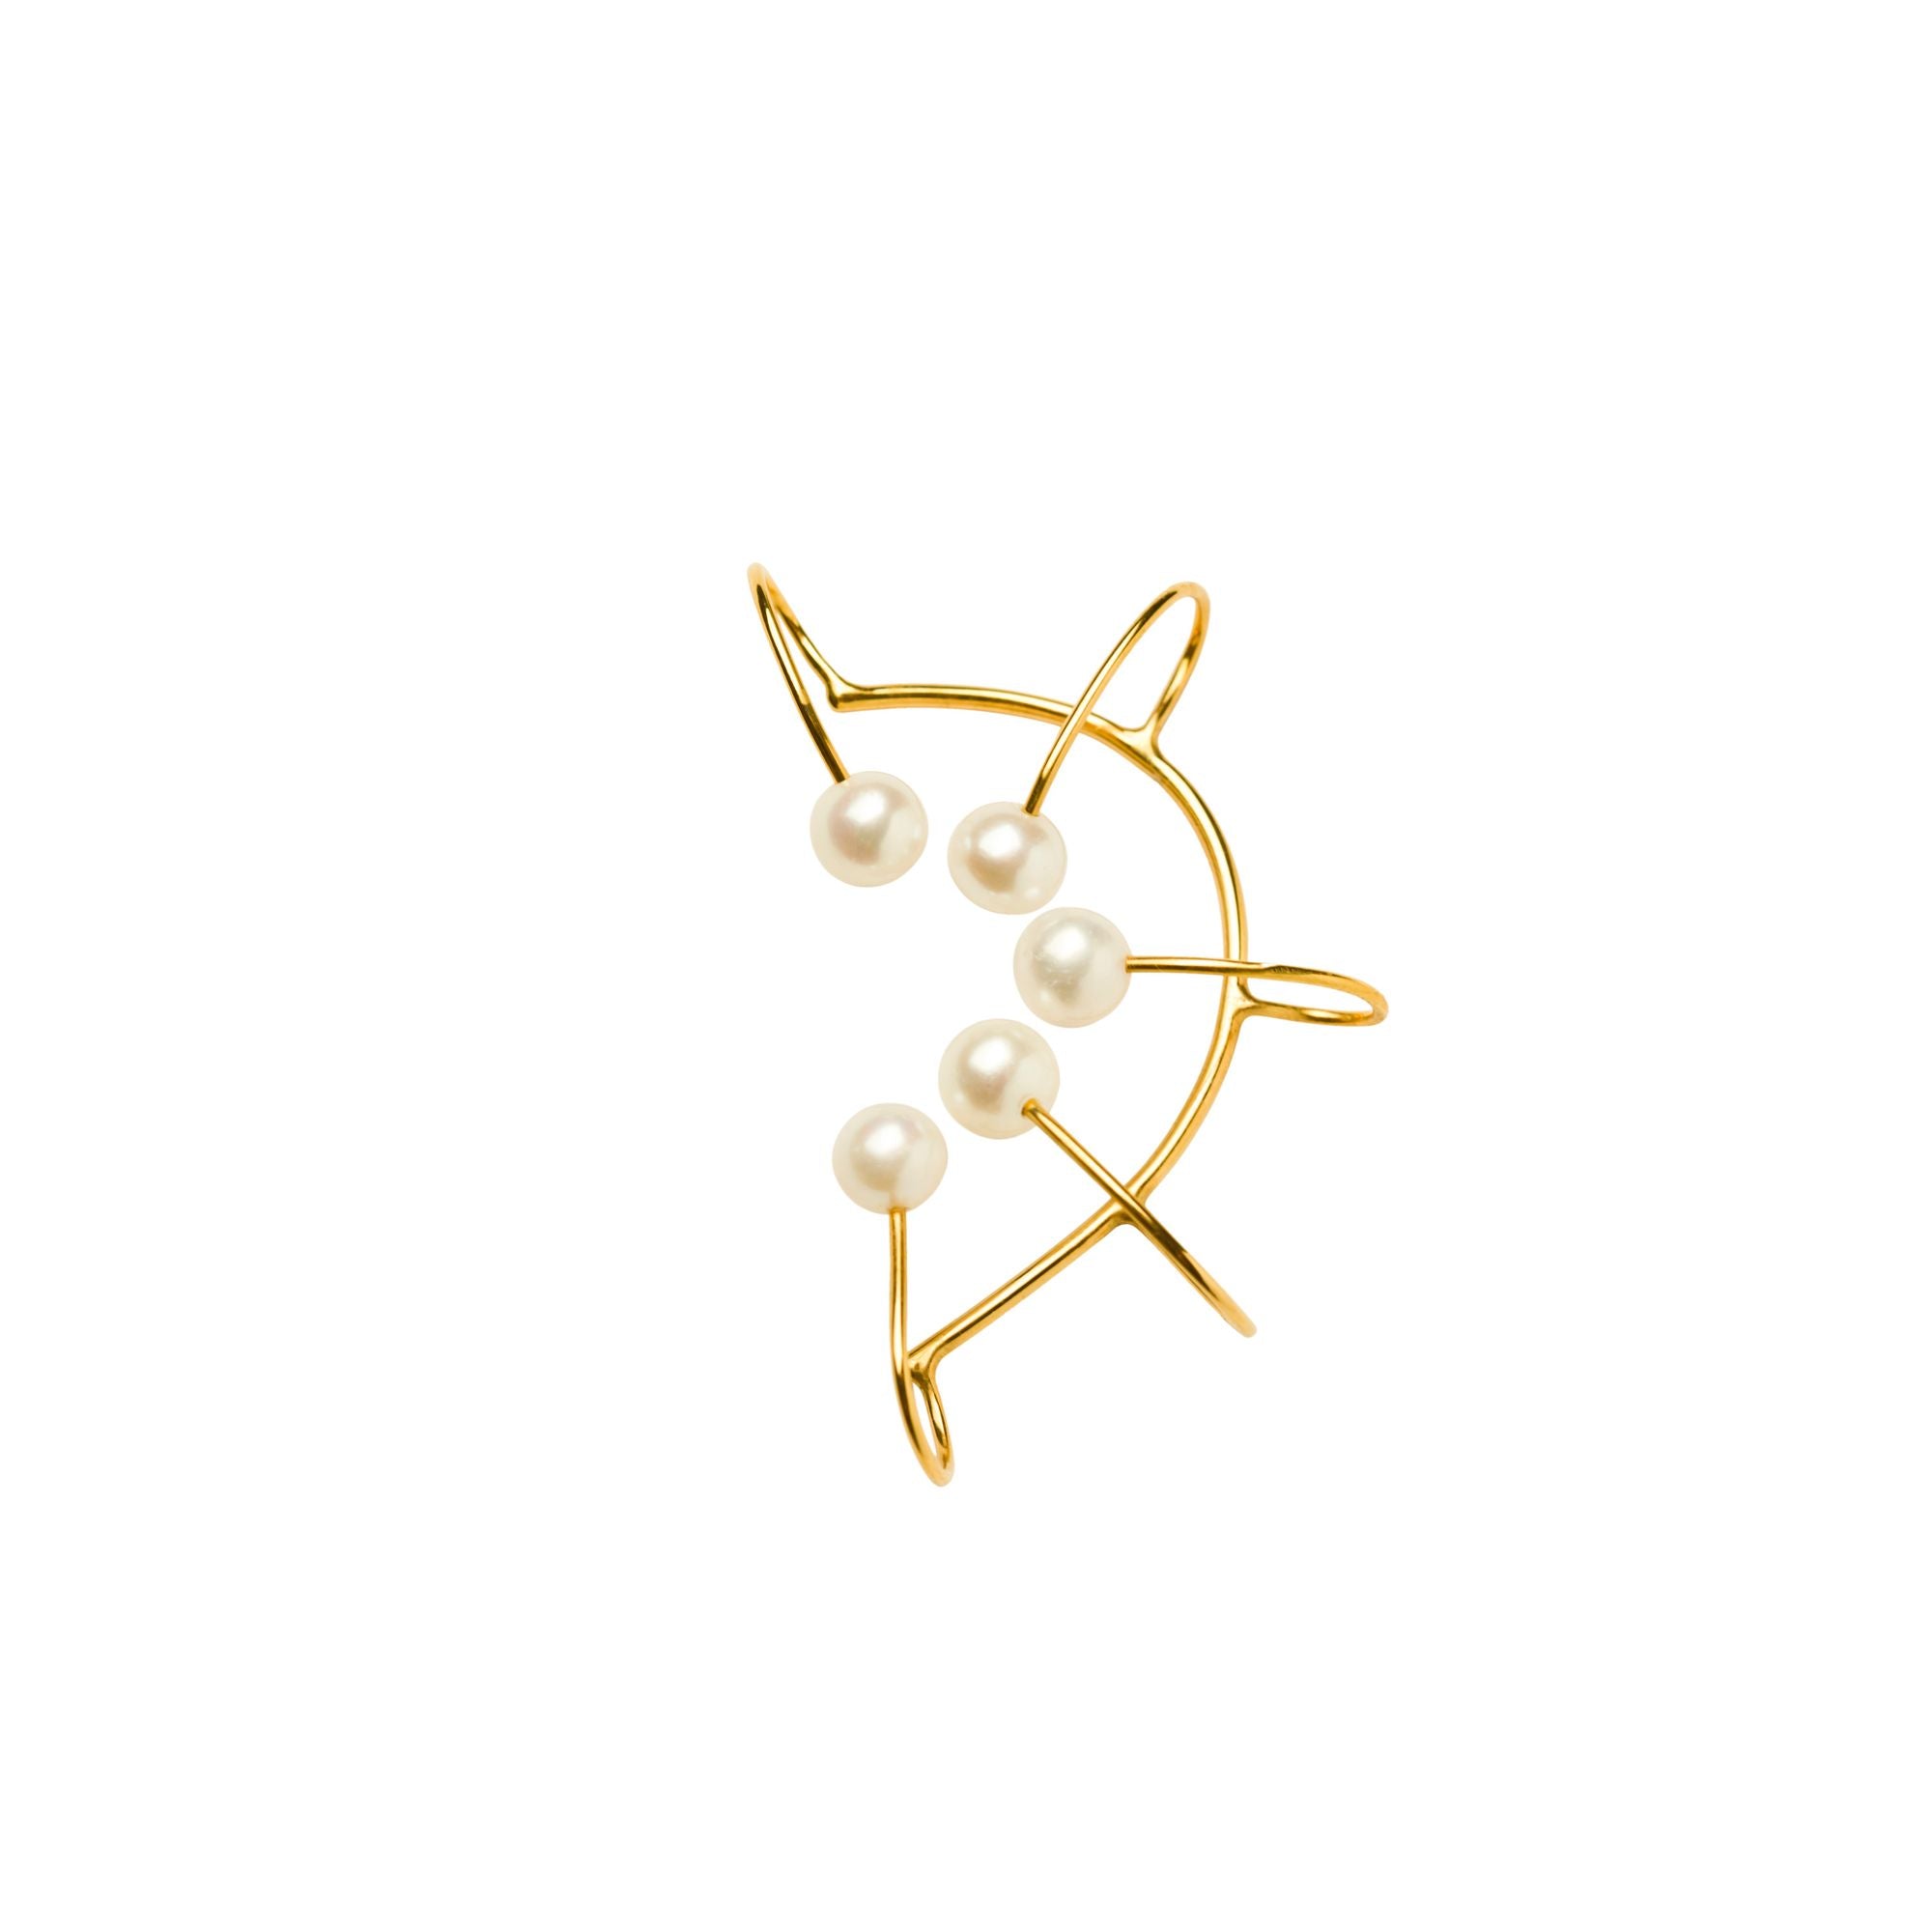 Vibe Harsløf Jewelry Iris concha Earclip Gold Plated – The